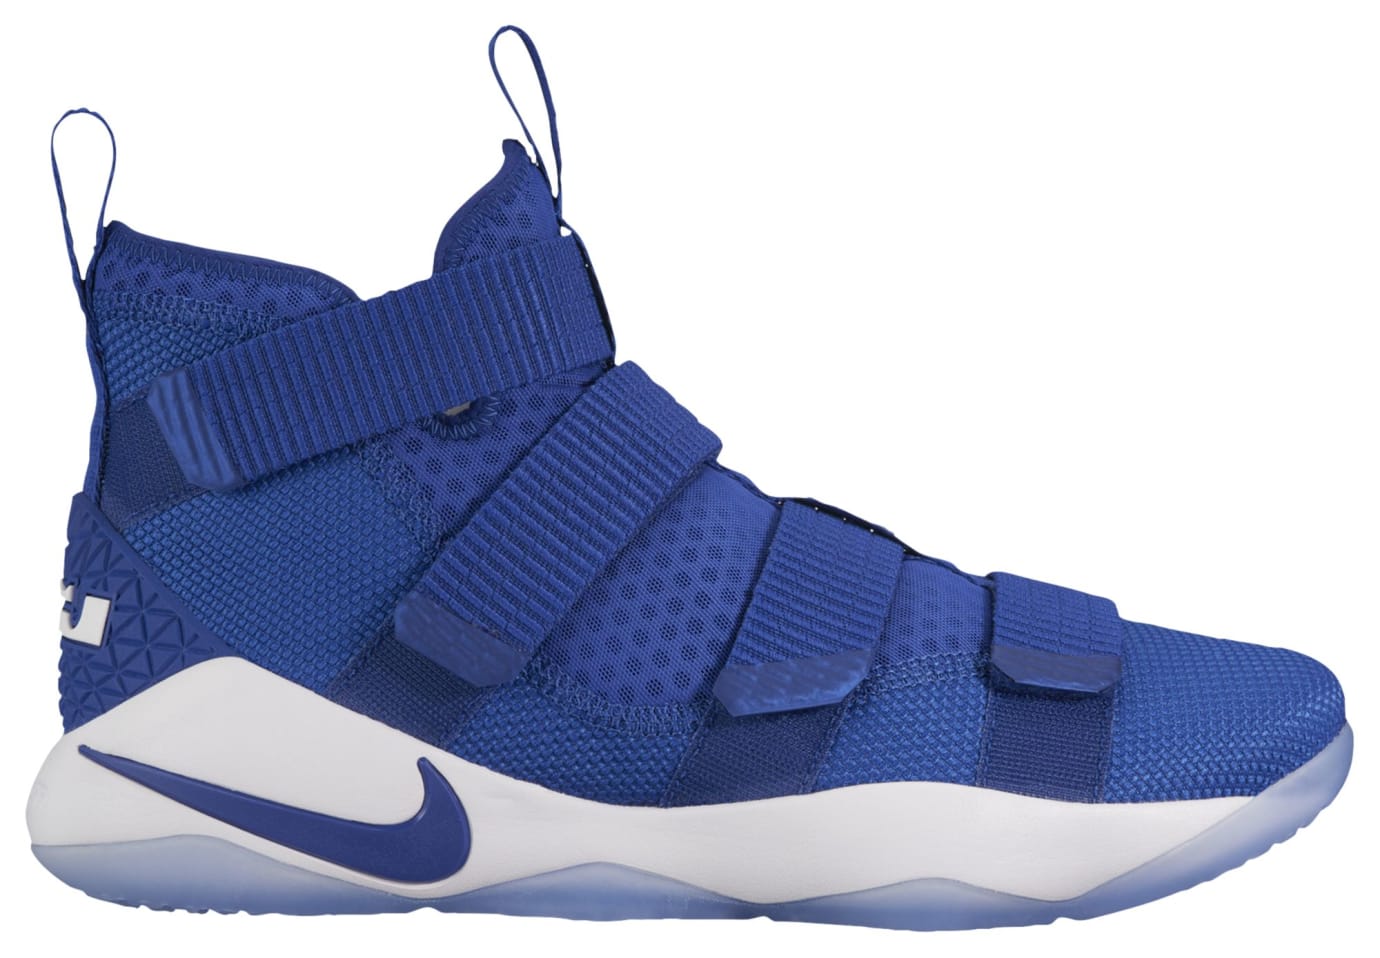 Nike LeBron Soldier 11 Team Bank Colorways | Sole Collector